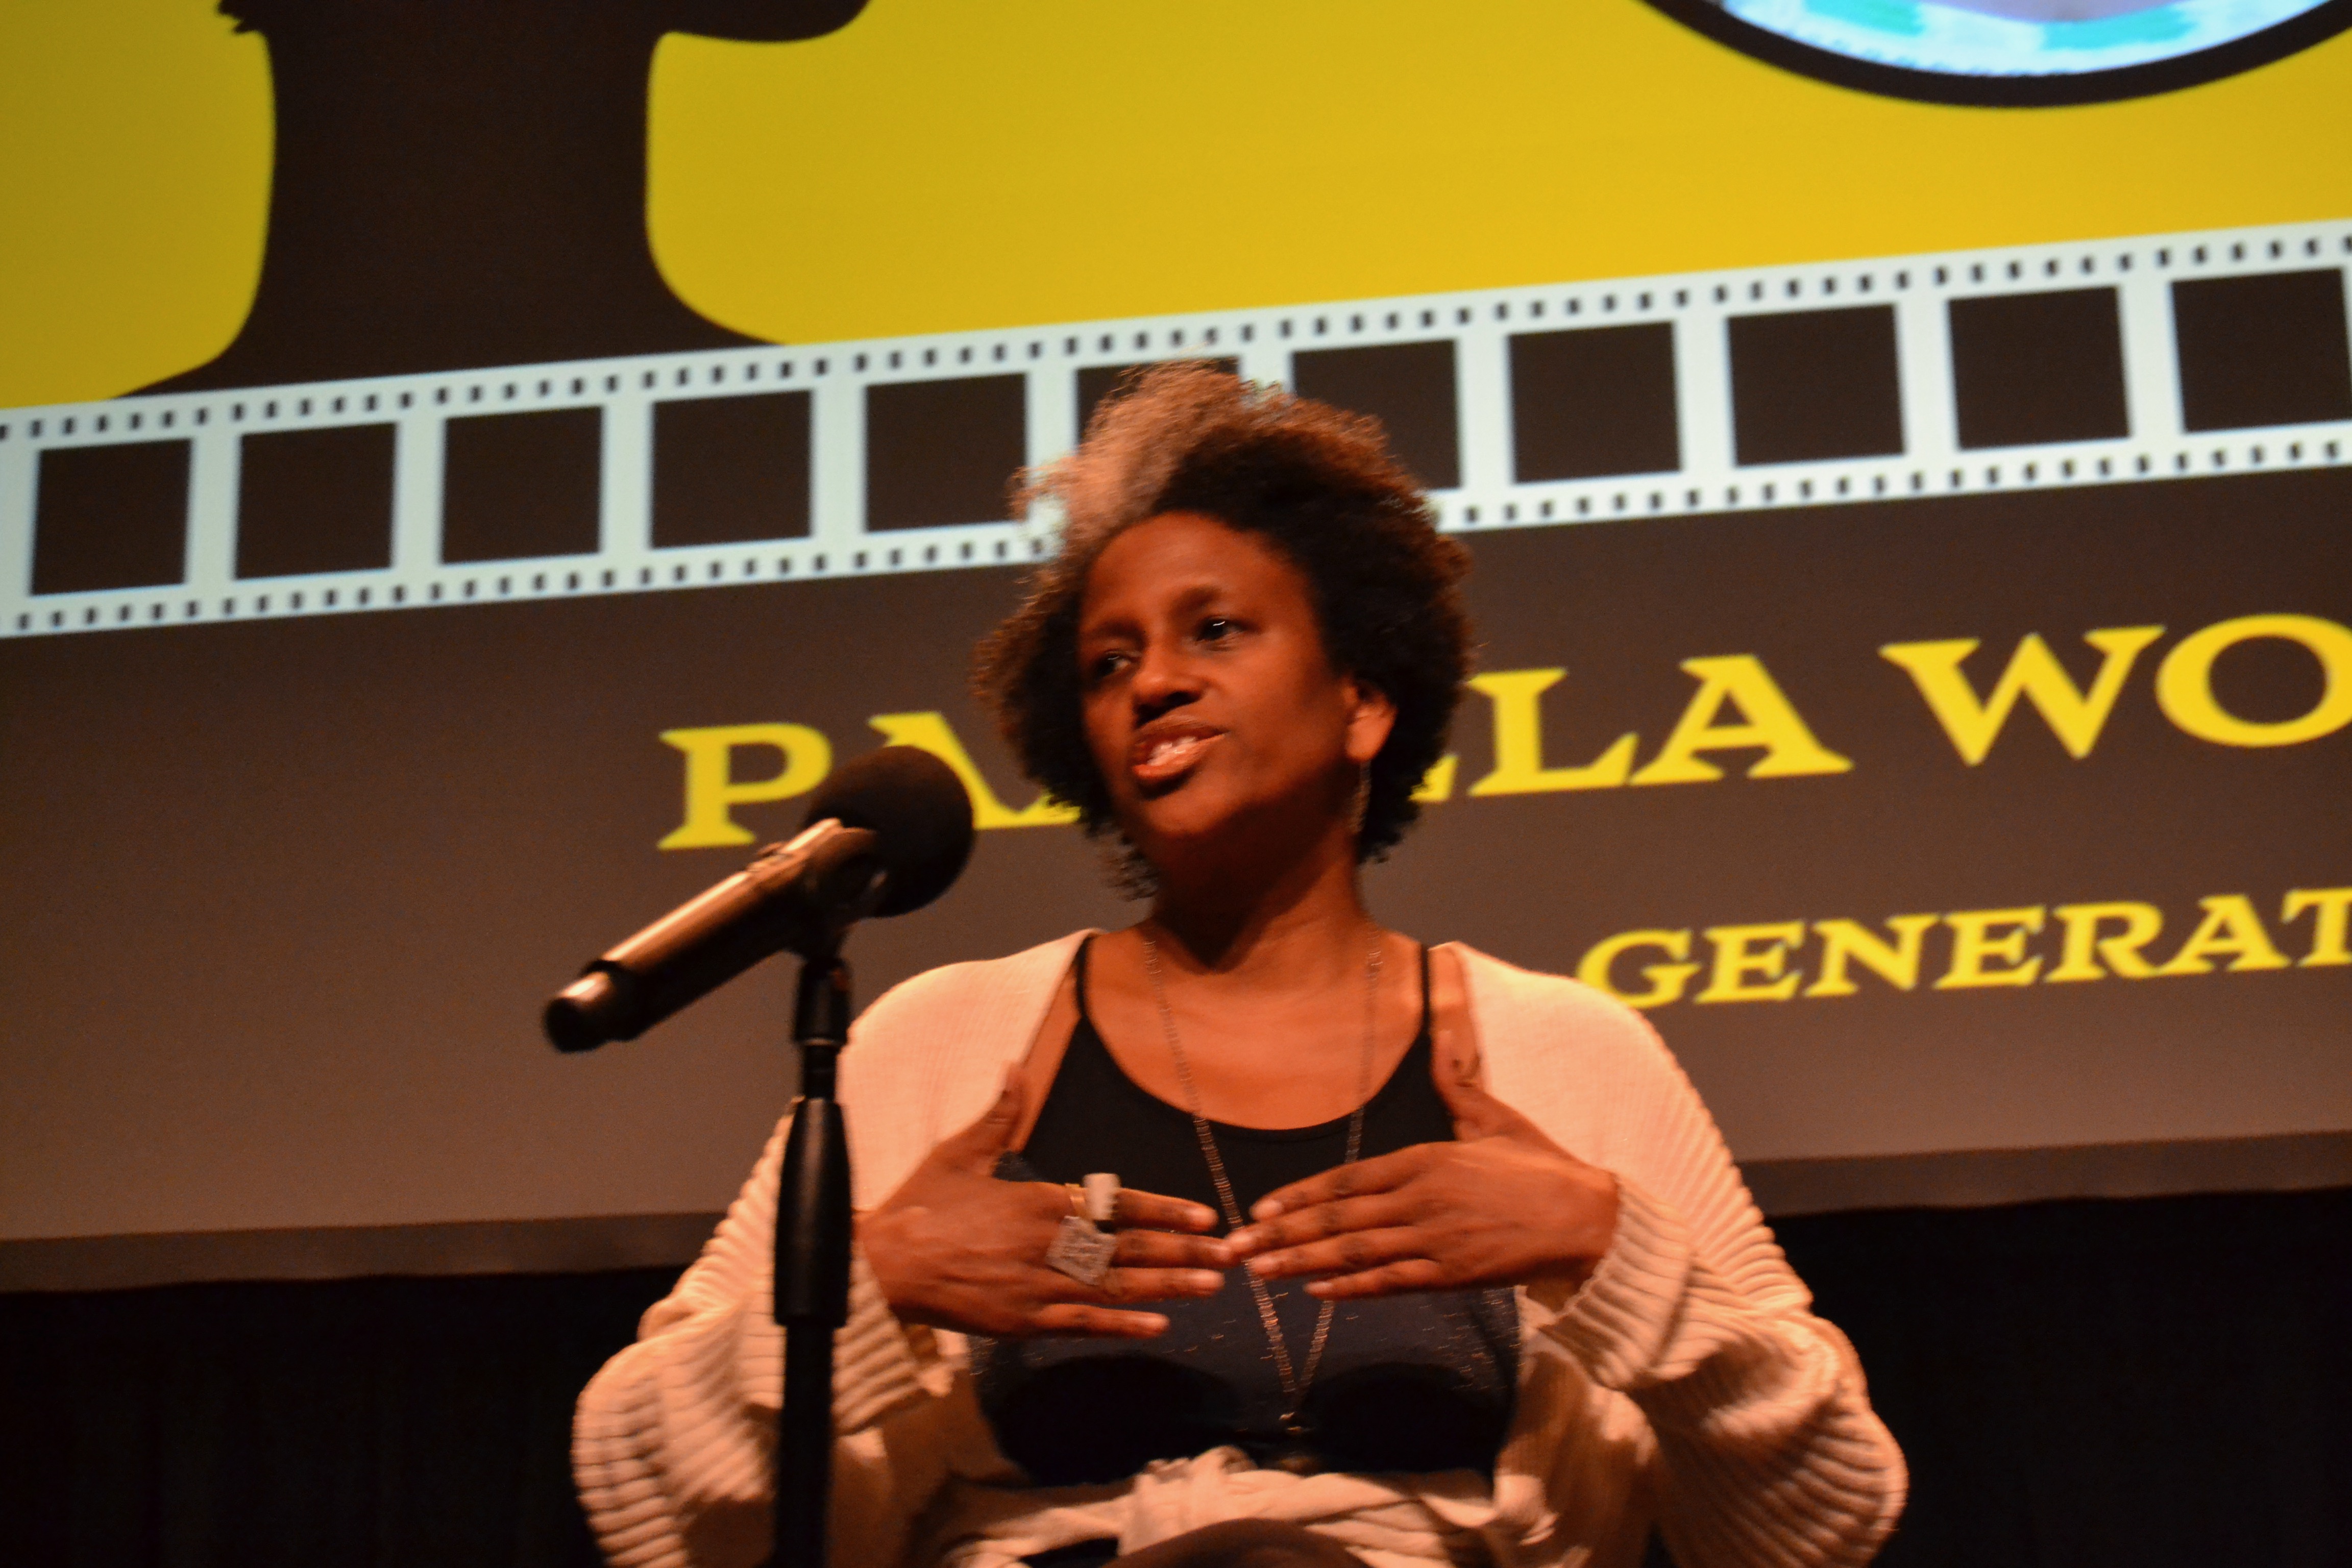 Pamela Woolford being expressive with her hands while speaking in front of a mic in front of a huge screen with parts of the words "PAMELA WOOLFORD, GENERATION" showing on the screen along with part of huge filmstrip graphics.